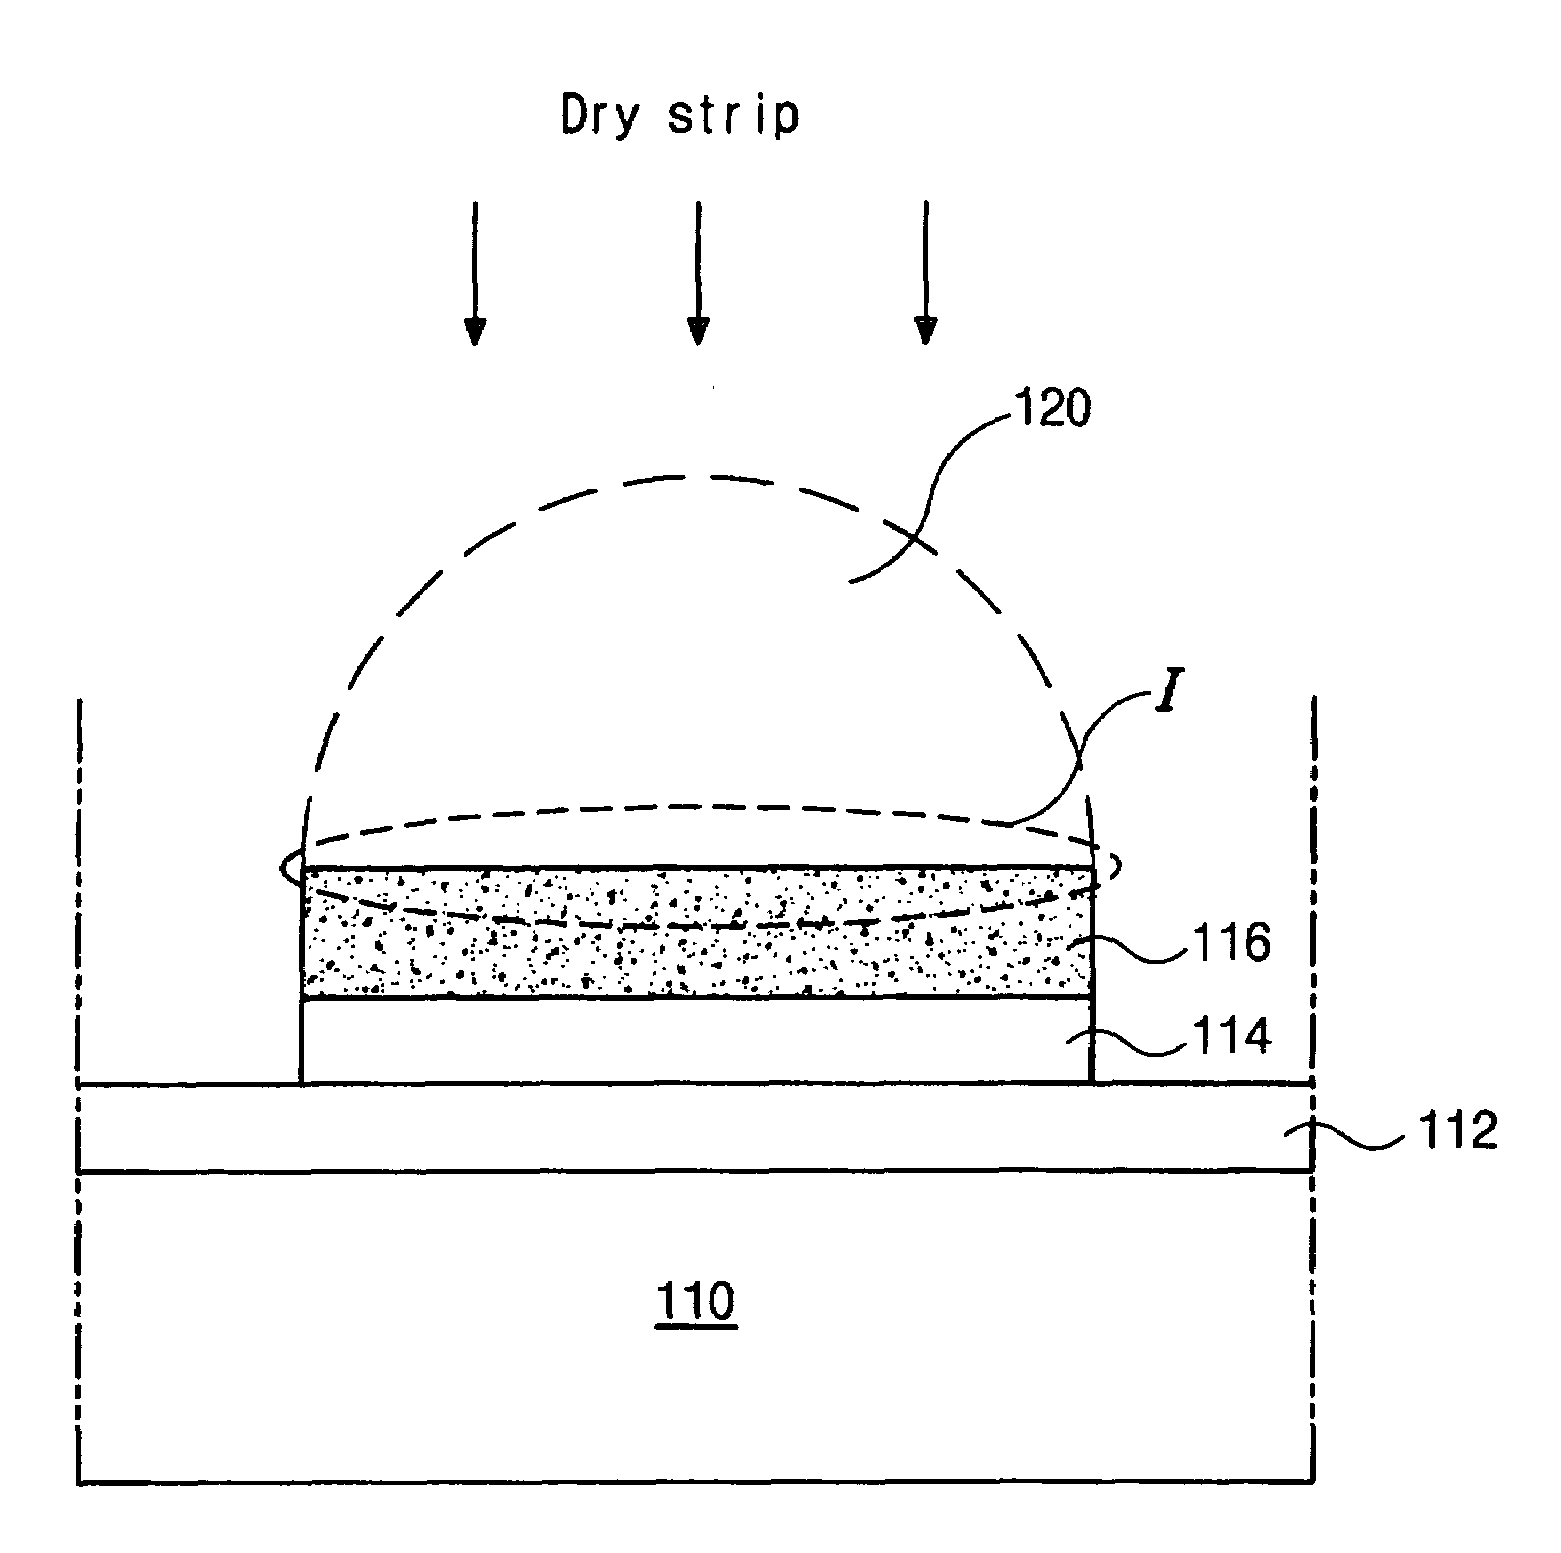 Array substrate for liquid crystal display device and method of manufacturing the same